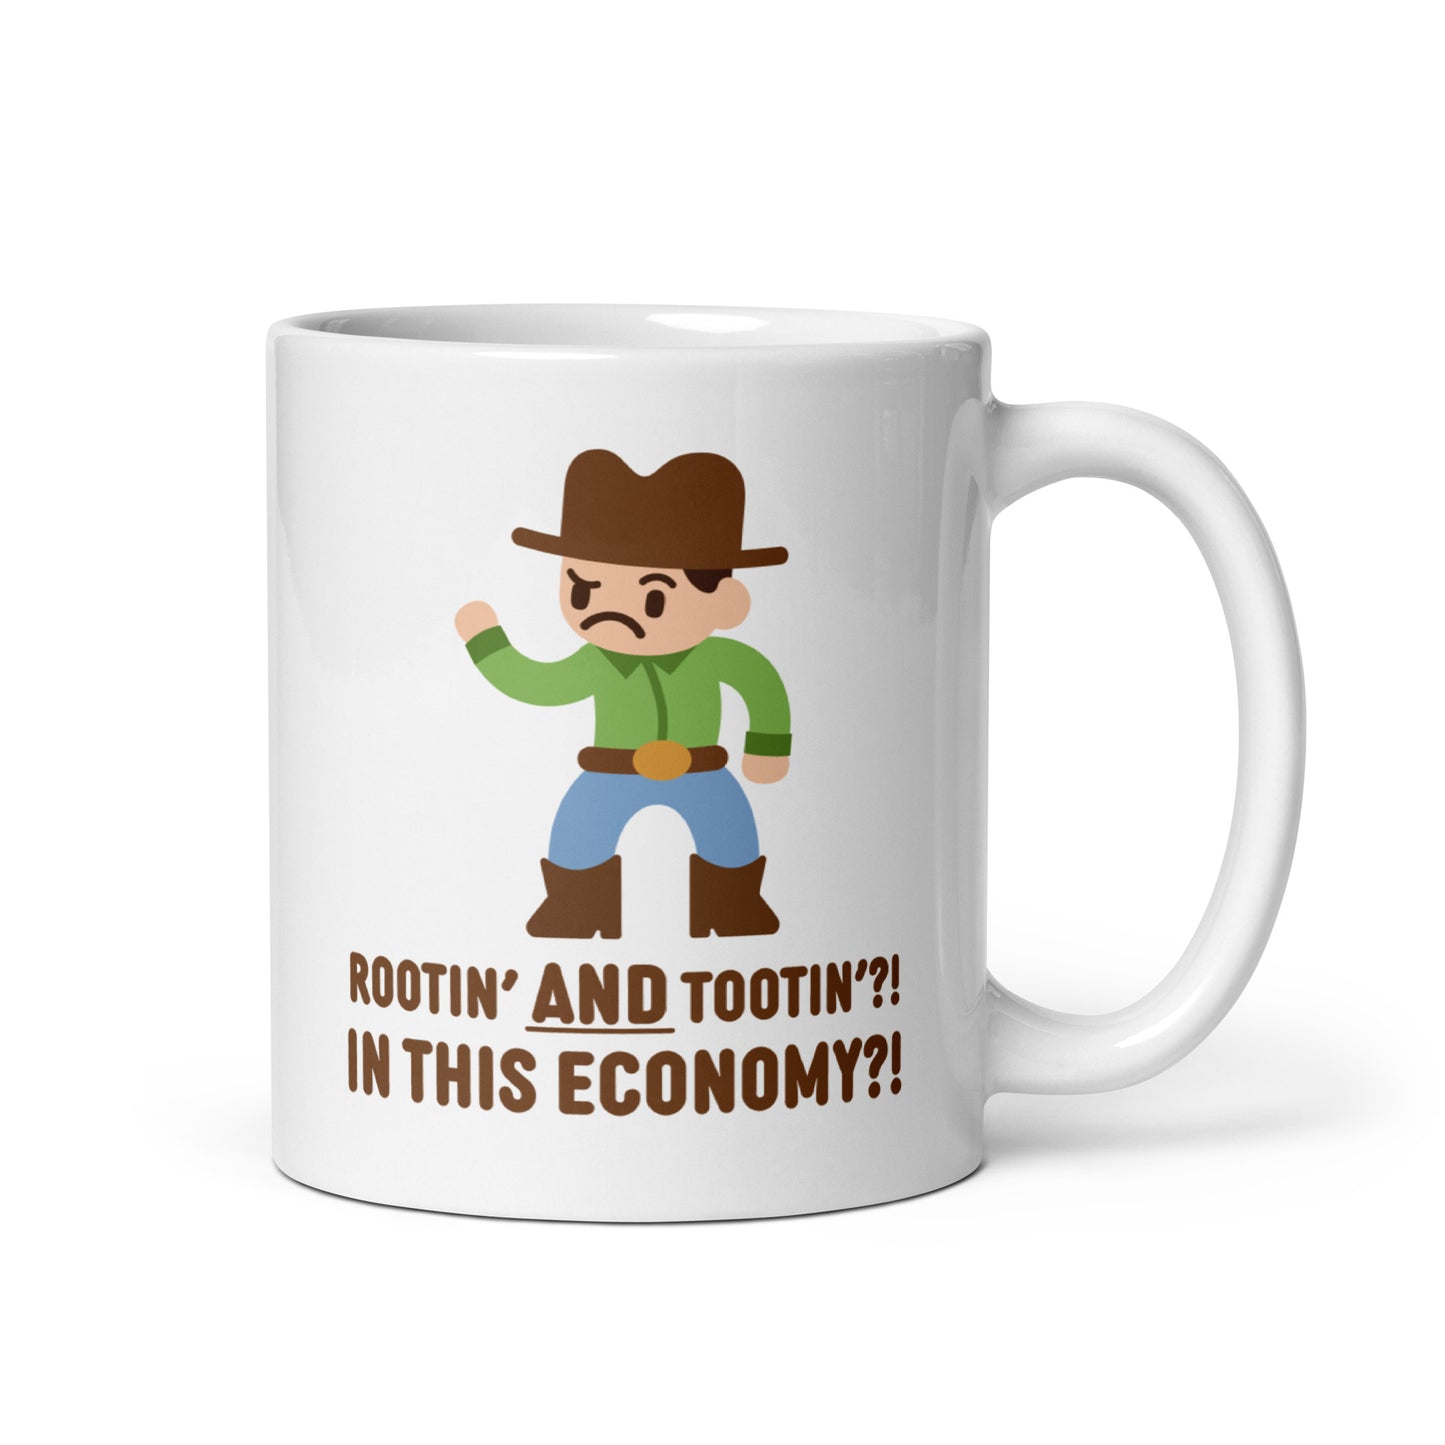 A white 11 ounce ceramic coffee mug featuring an illustration of a confused-looking cowboy wearing a green shirt. Text underneath the cowboy reads "Rootin' AND tootin'?! In this economy?!"